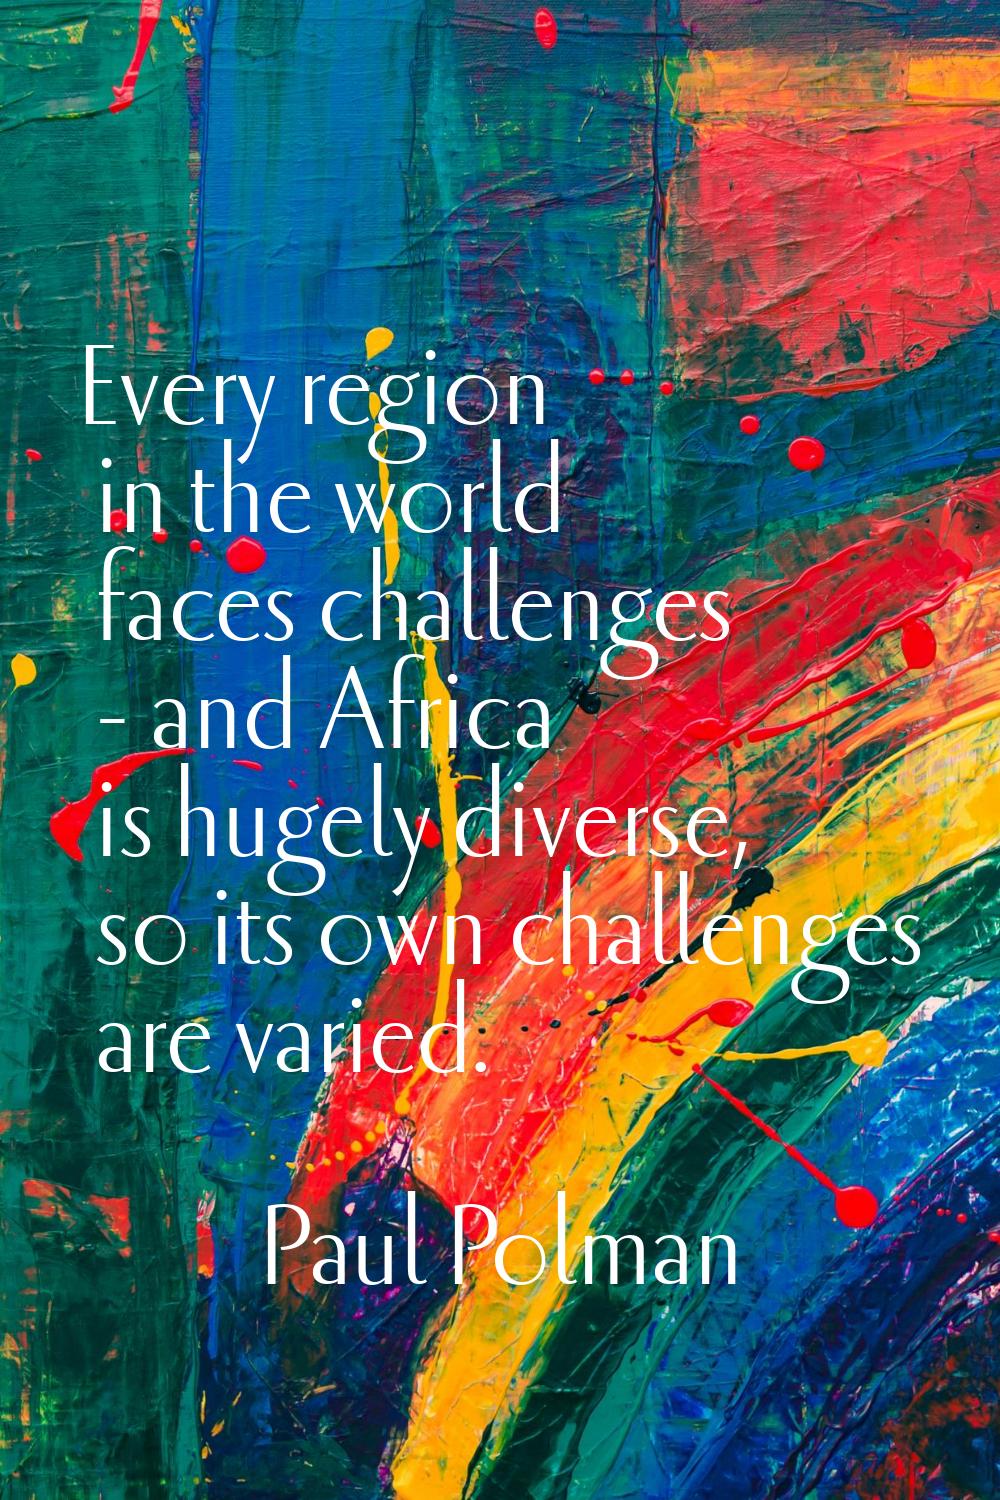 Every region in the world faces challenges - and Africa is hugely diverse, so its own challenges ar